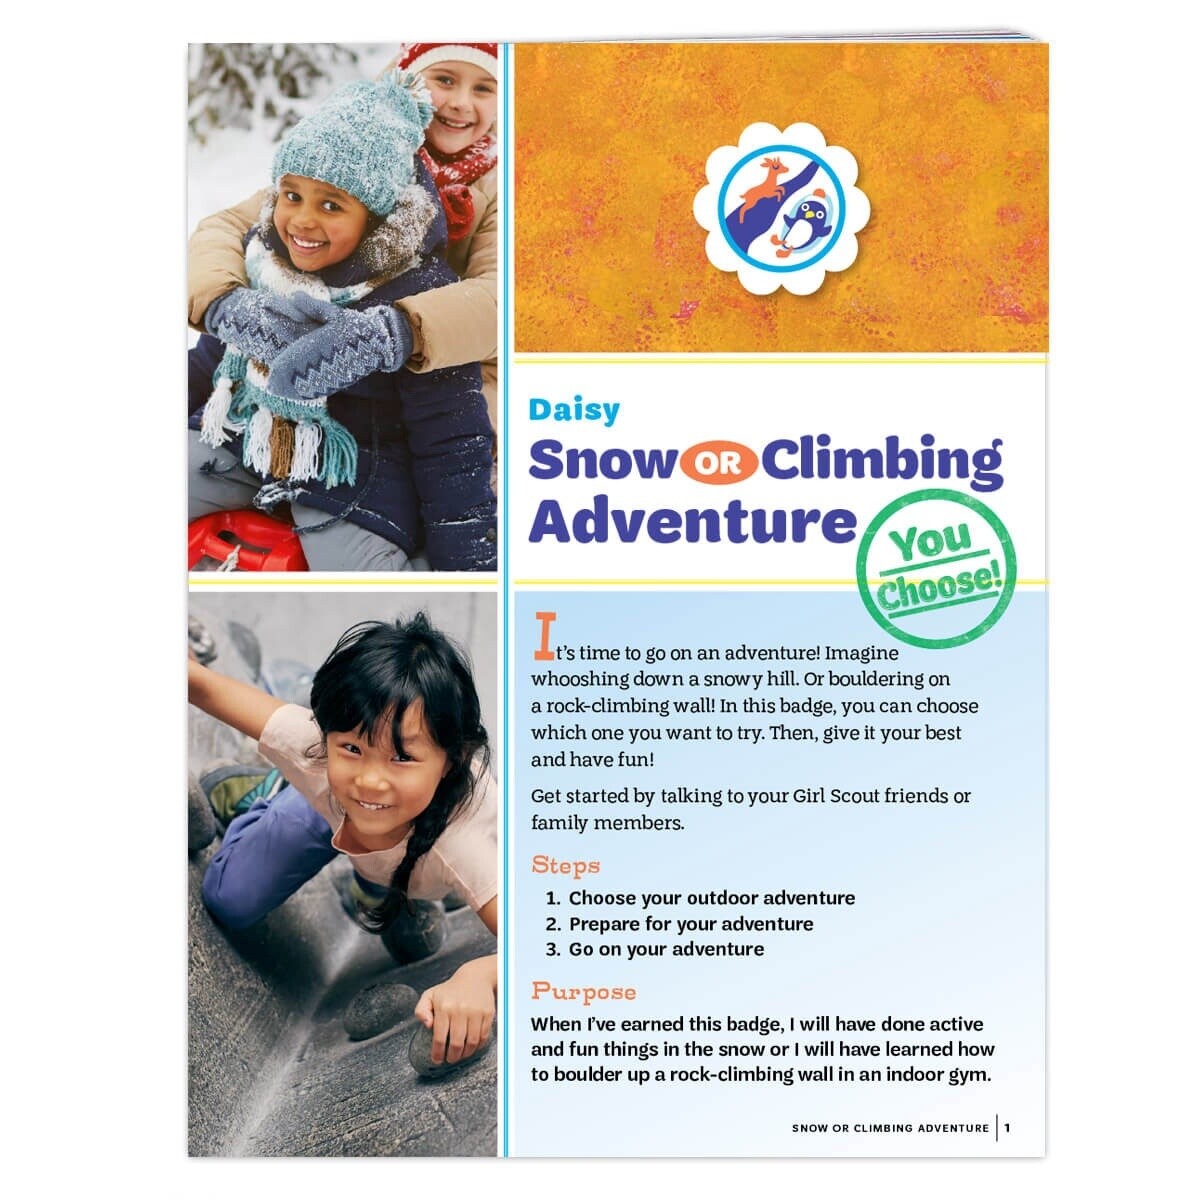 Daisy Snow Or Climbing Adventure Badge Requirements